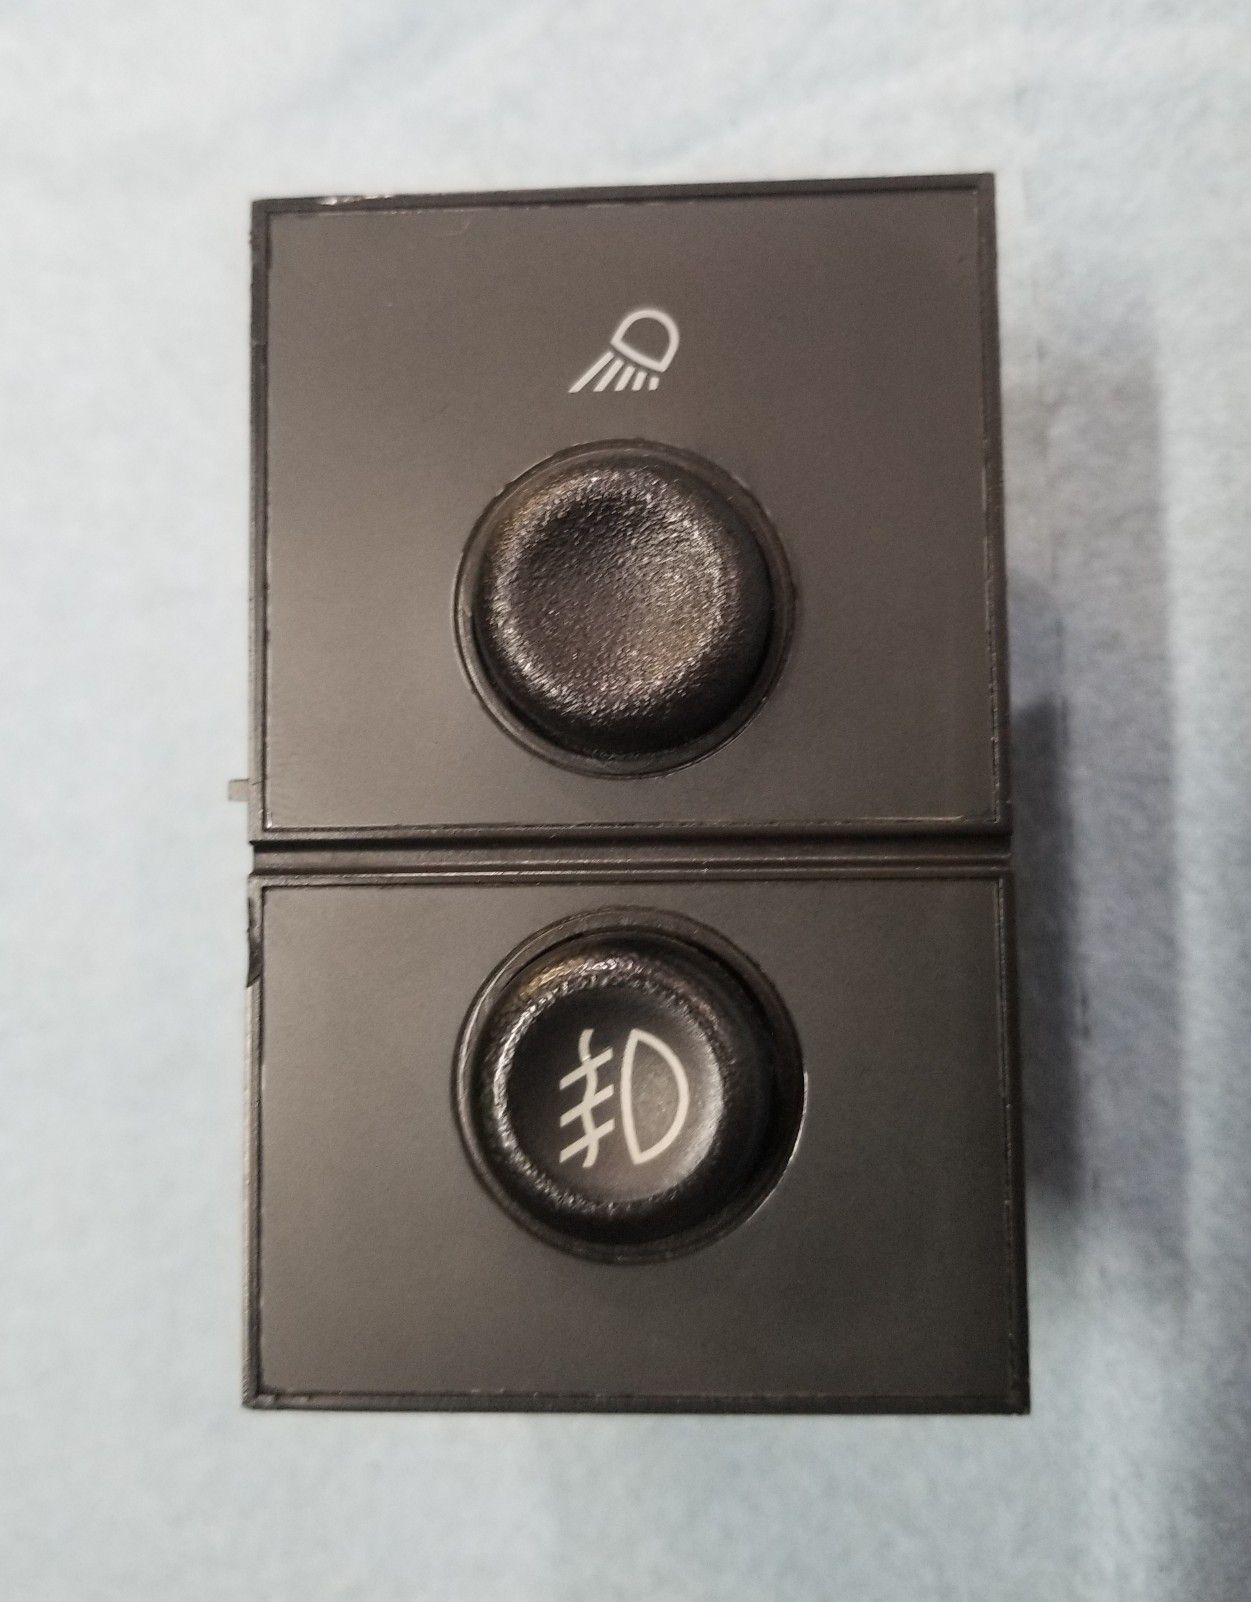 GM OEM Cargo Light And Fog Light Switch in Good Condition.